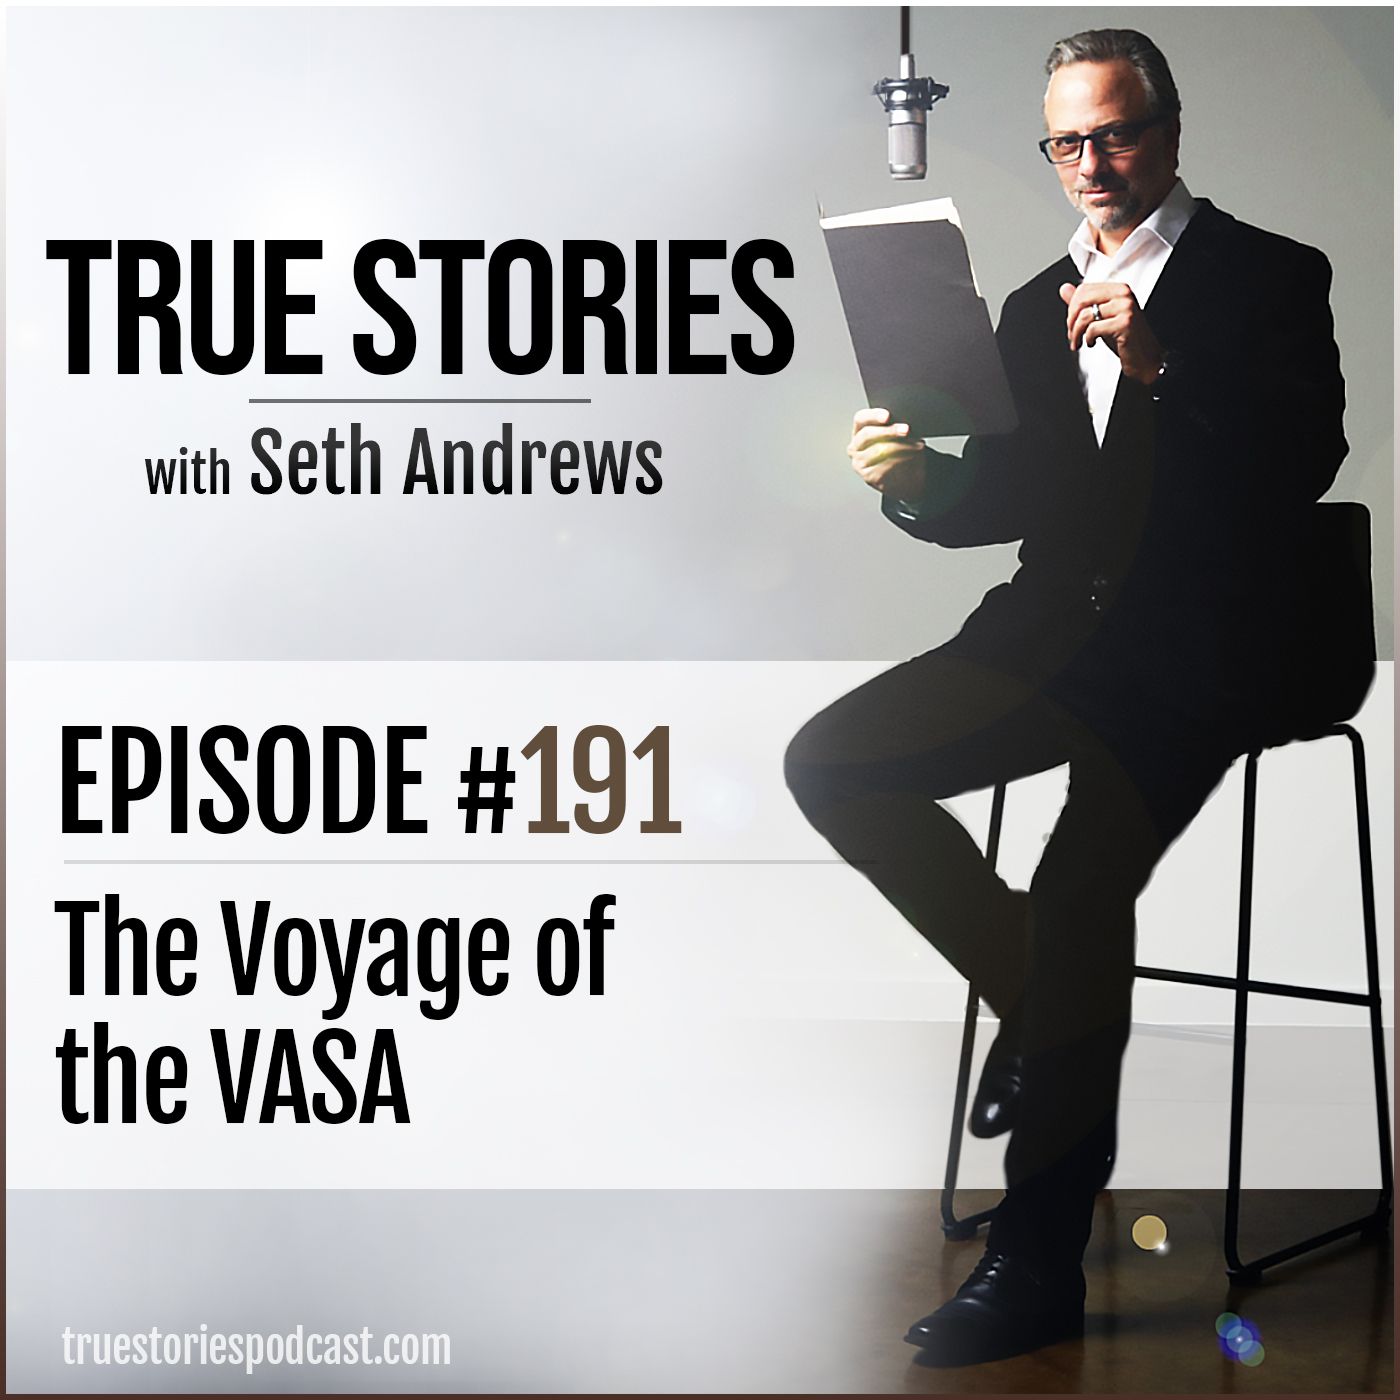 True Stories #191 - The Voyage of the Vasa